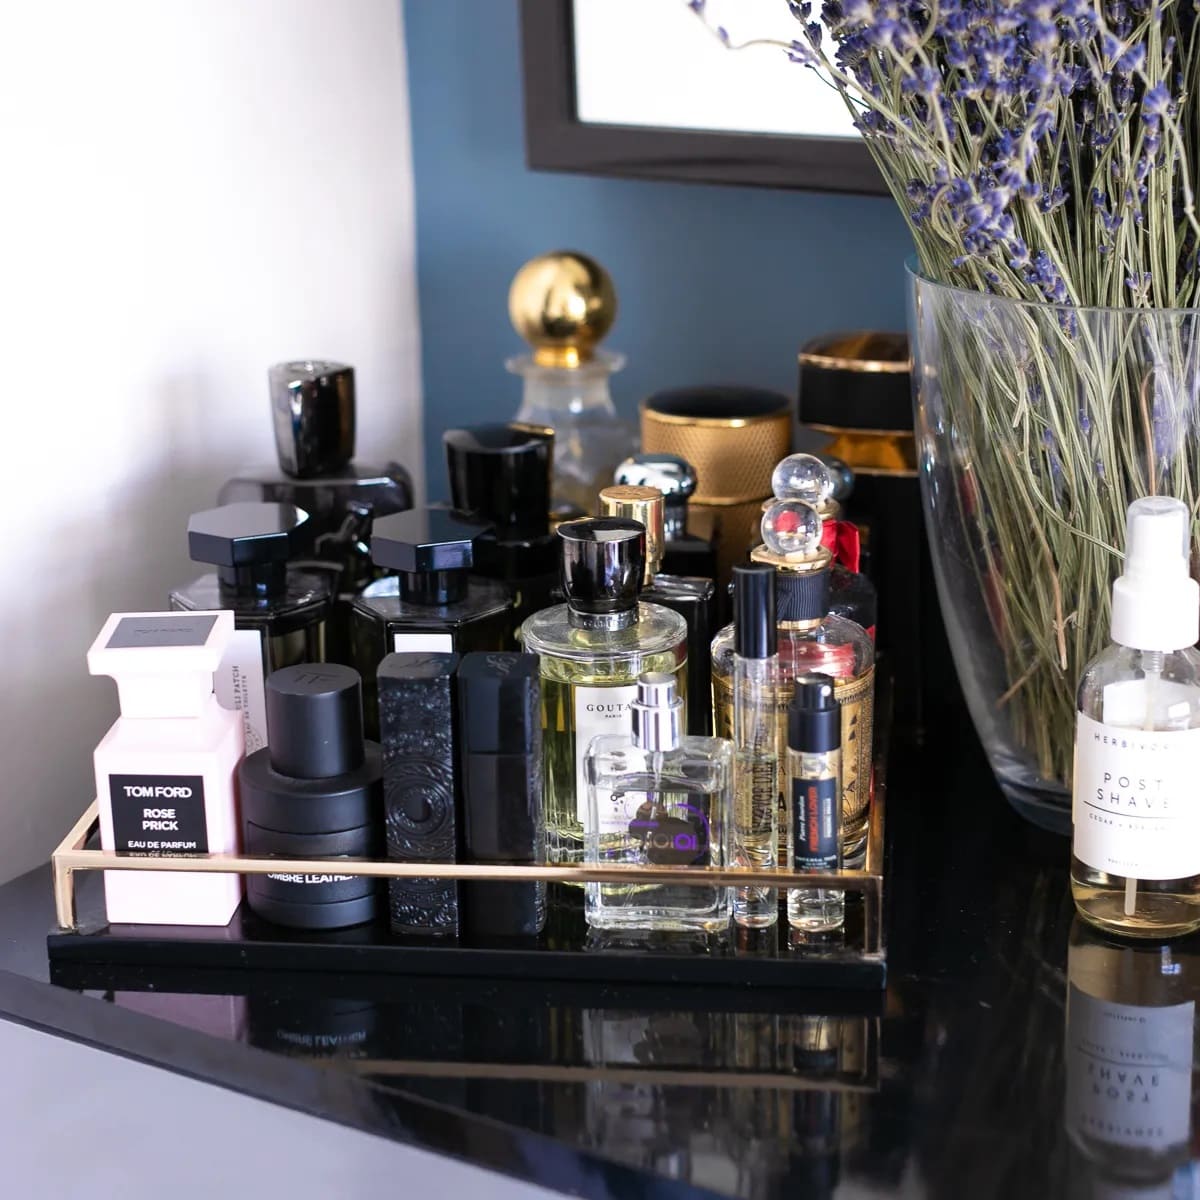 How To Store Perfume On Dresser